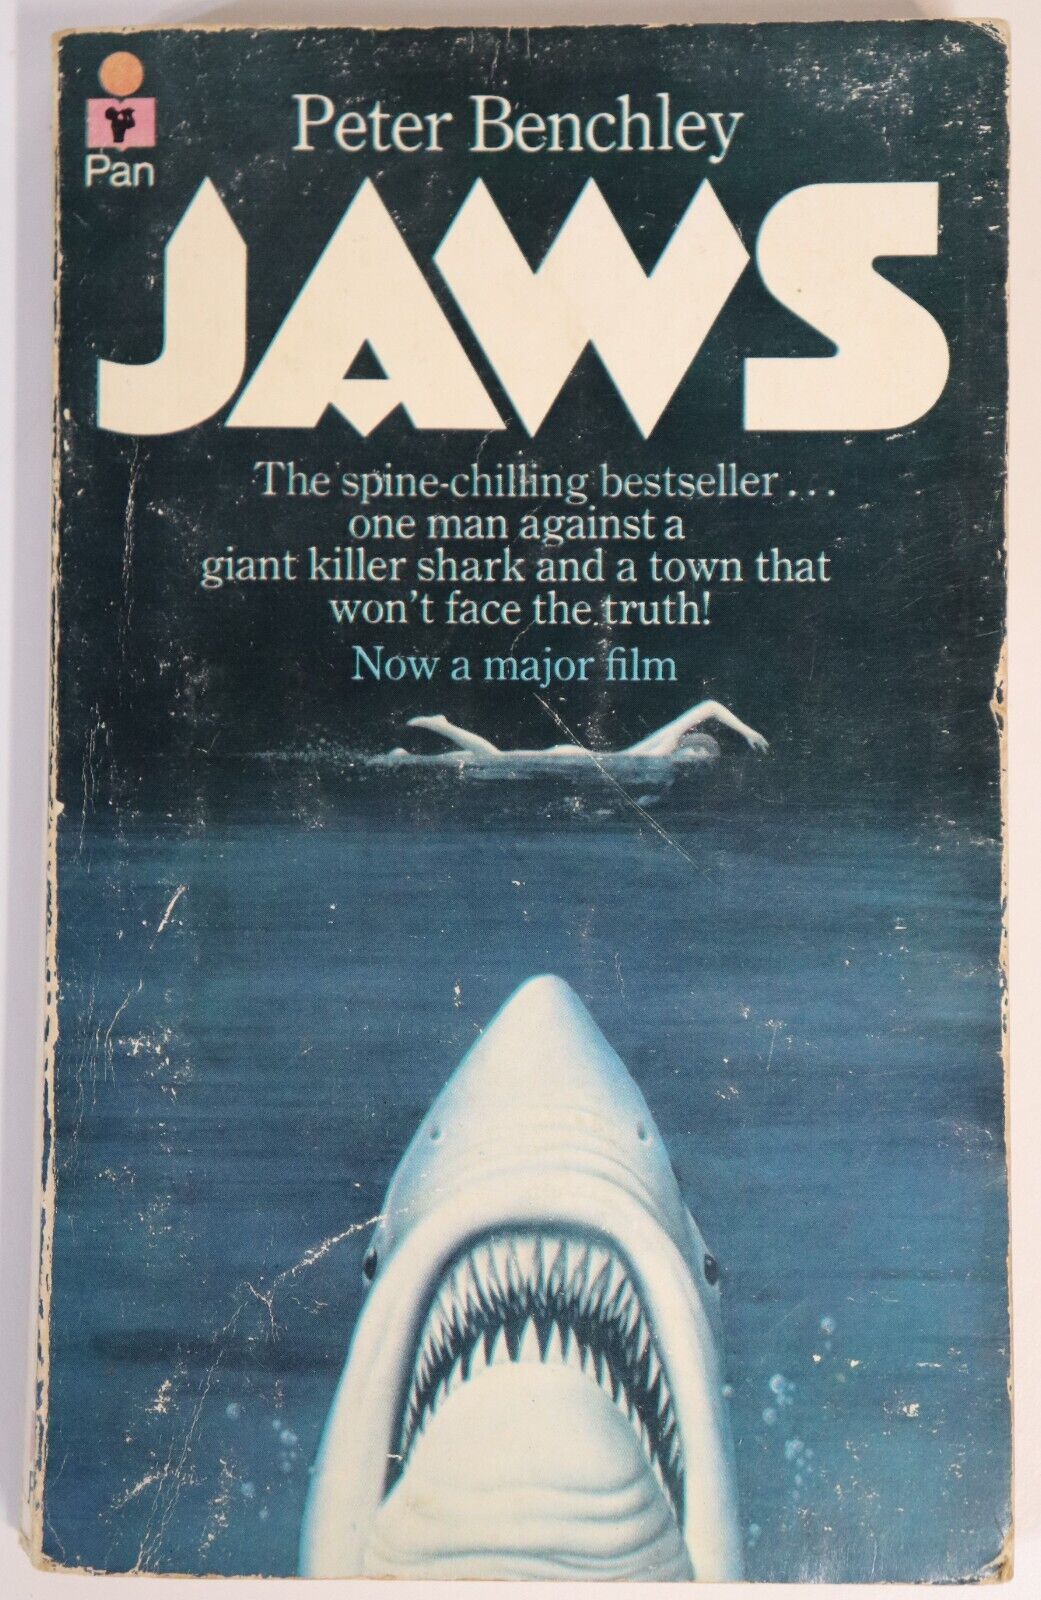 Jaws by Peter Benchley - 1975 - Vintage Fiction Book